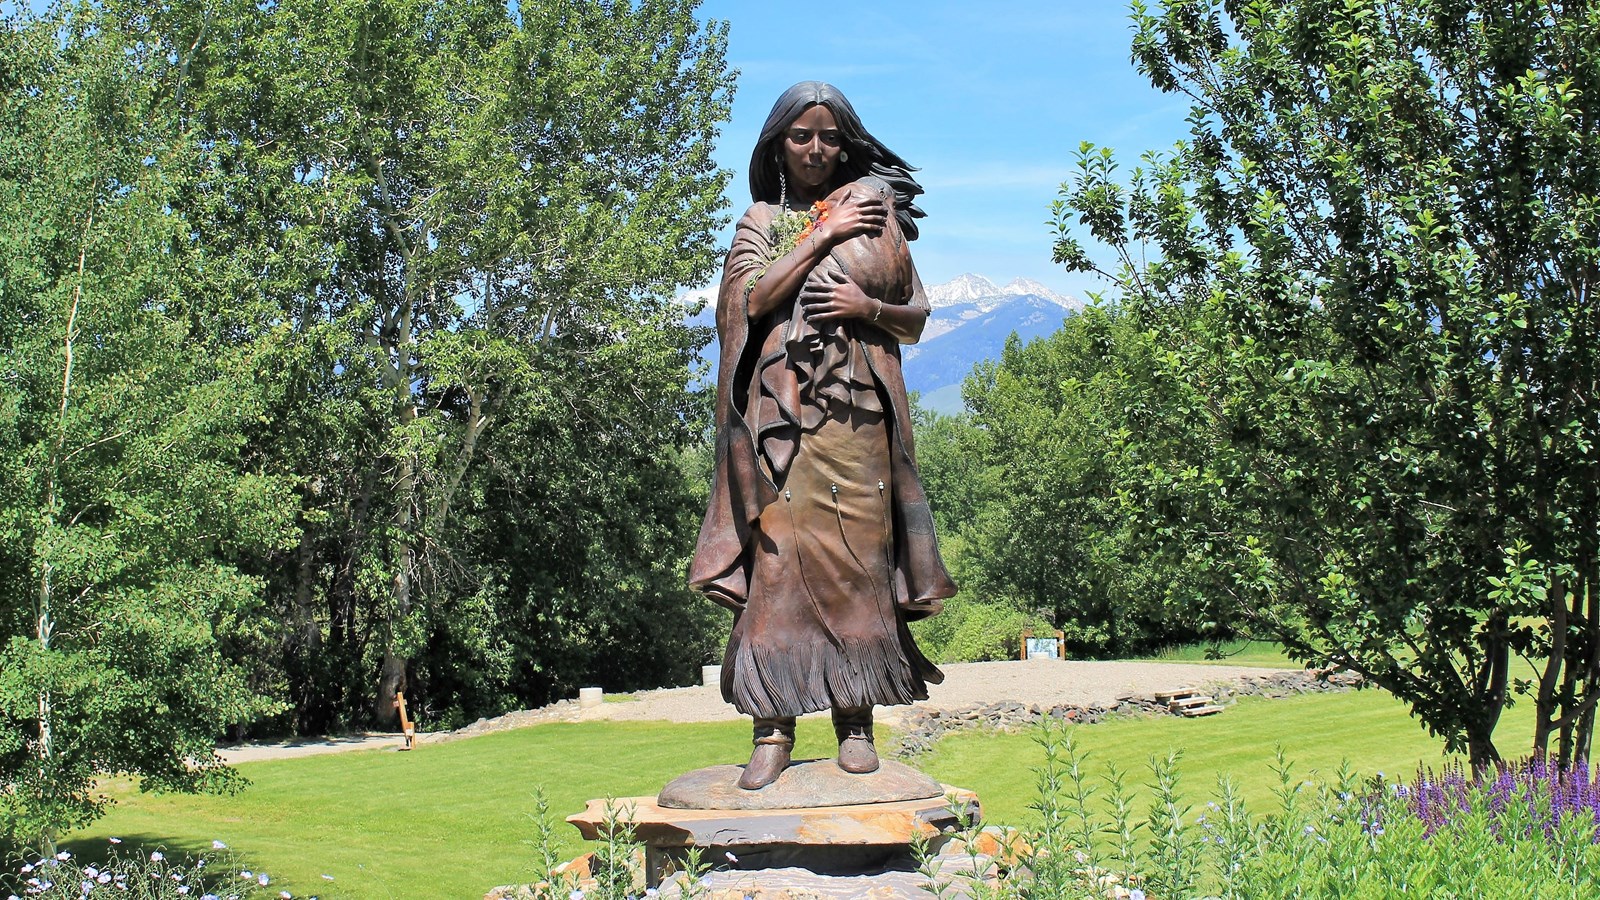 A bronze statue of Sacajawea holding her child amid green grass and trees